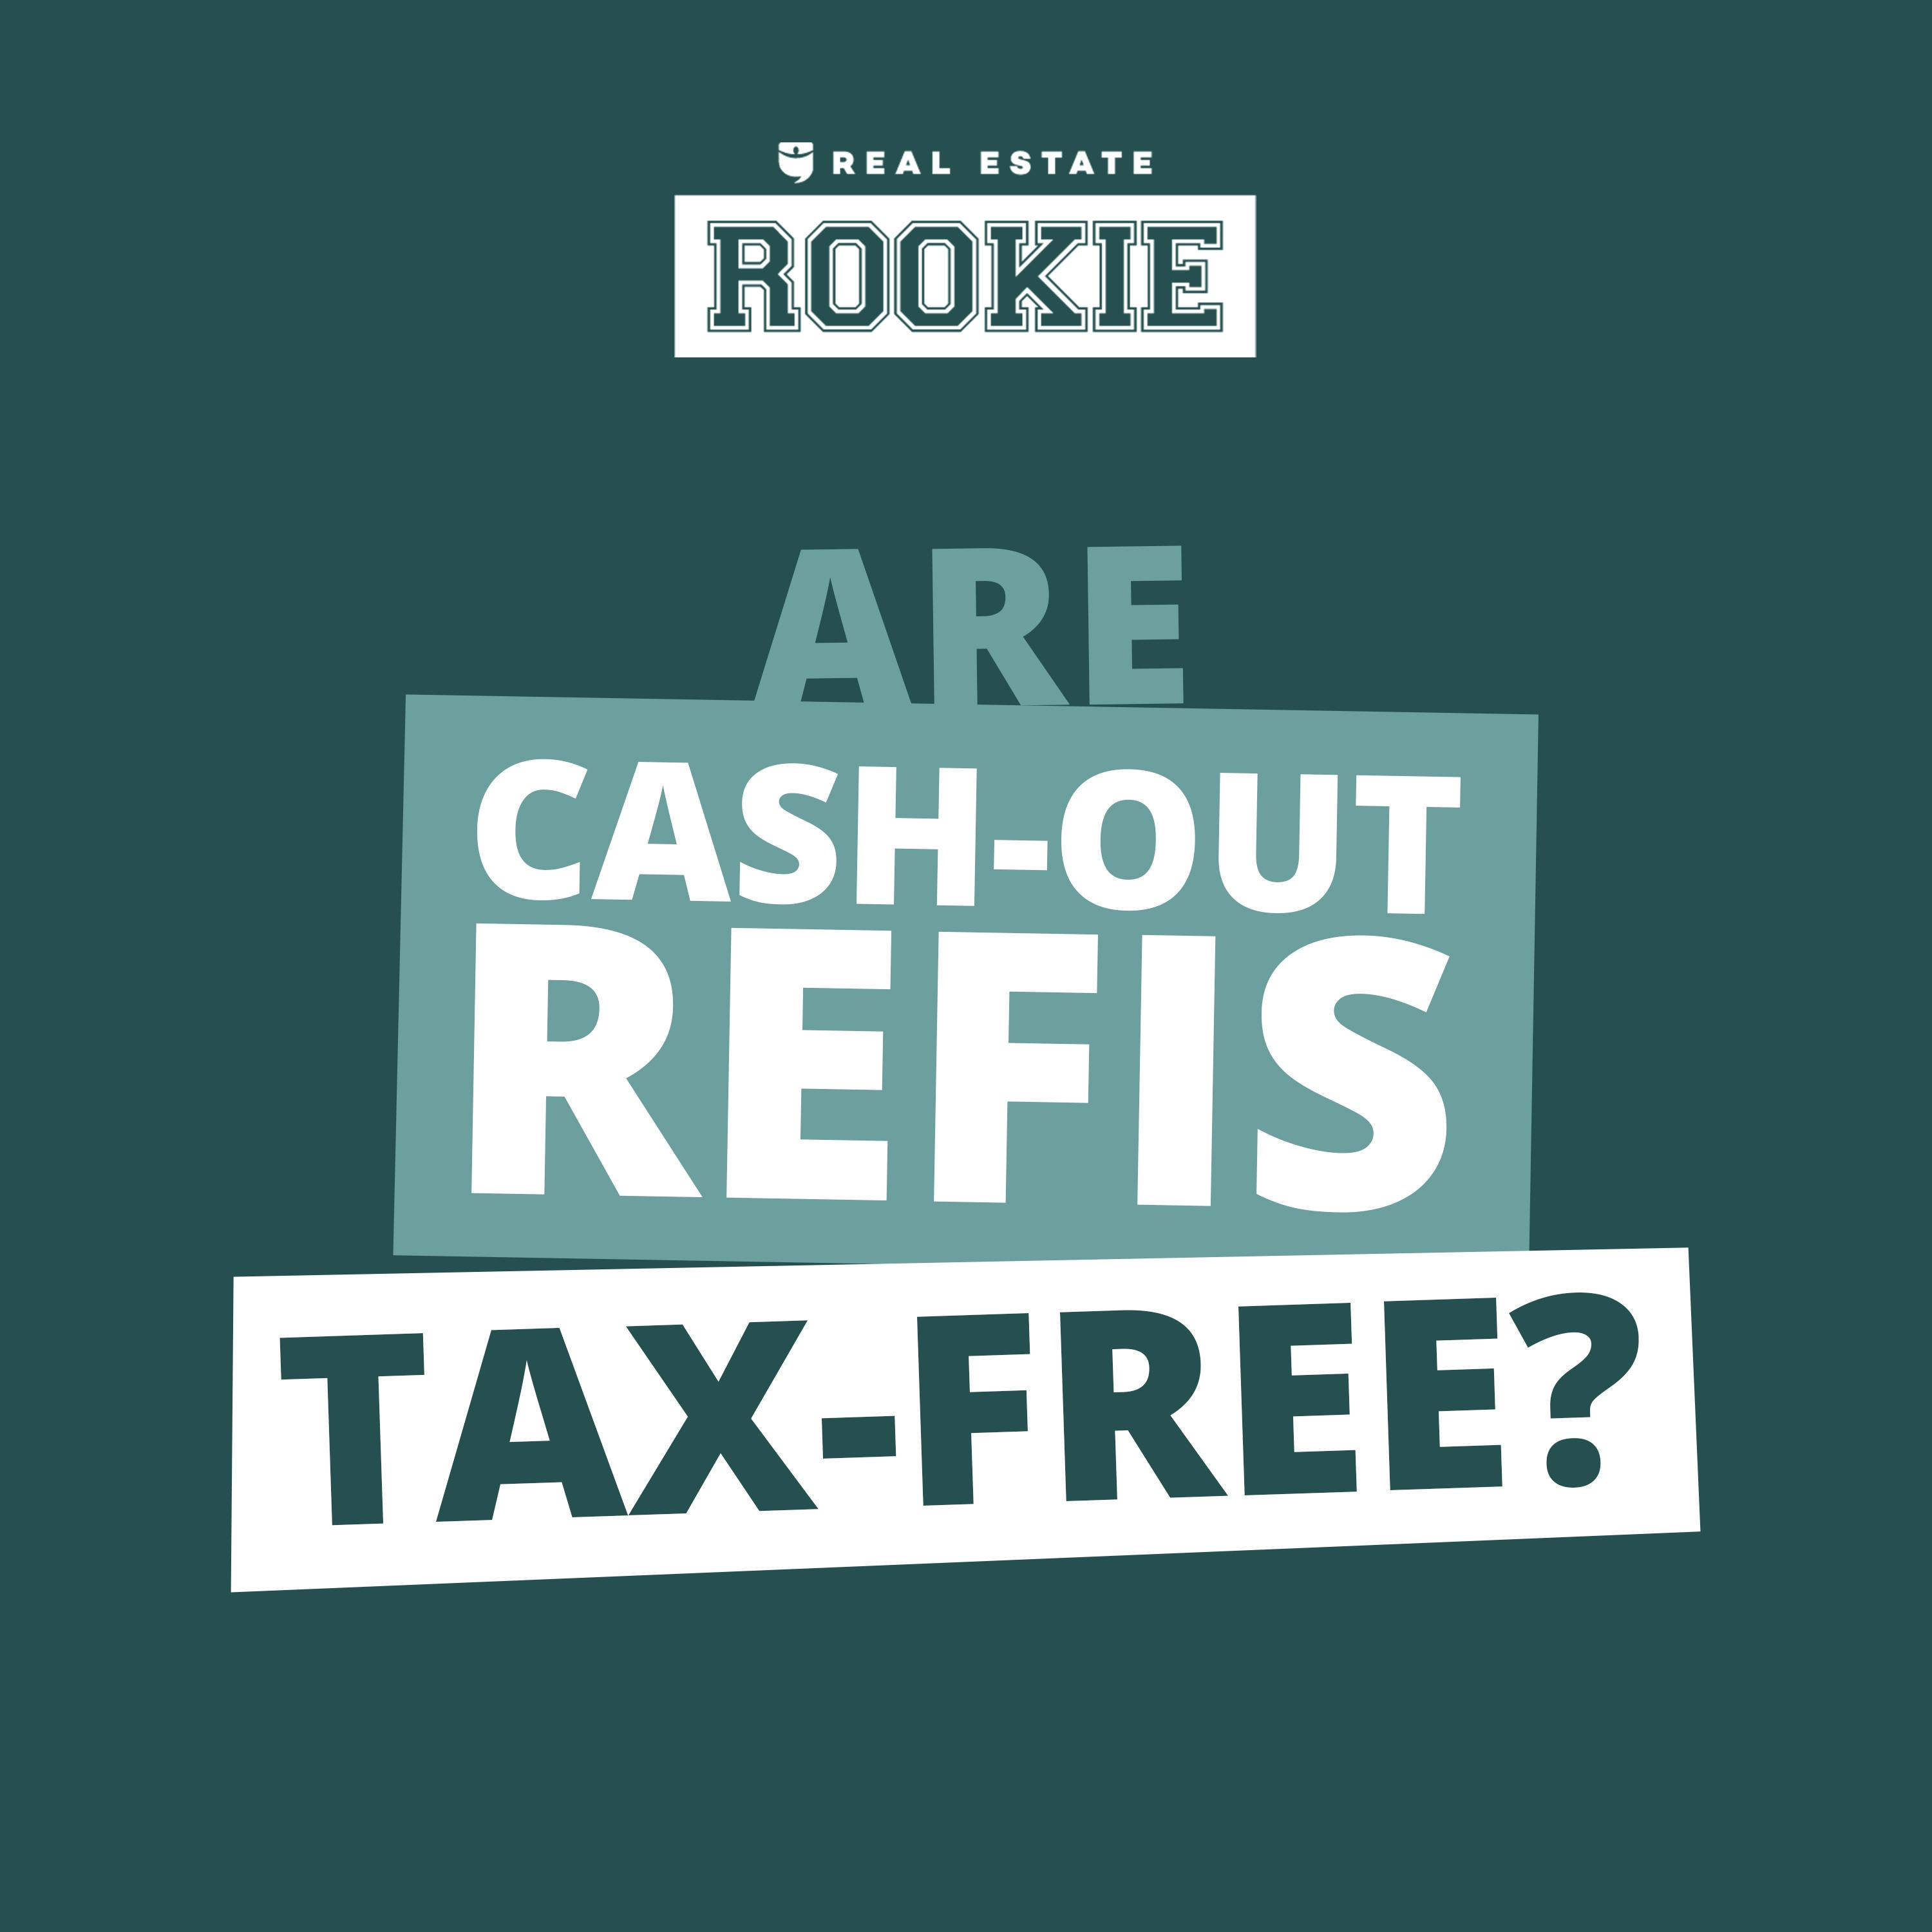 202: Rookie Reply: Is a Cash-Out Refinance Taxable?